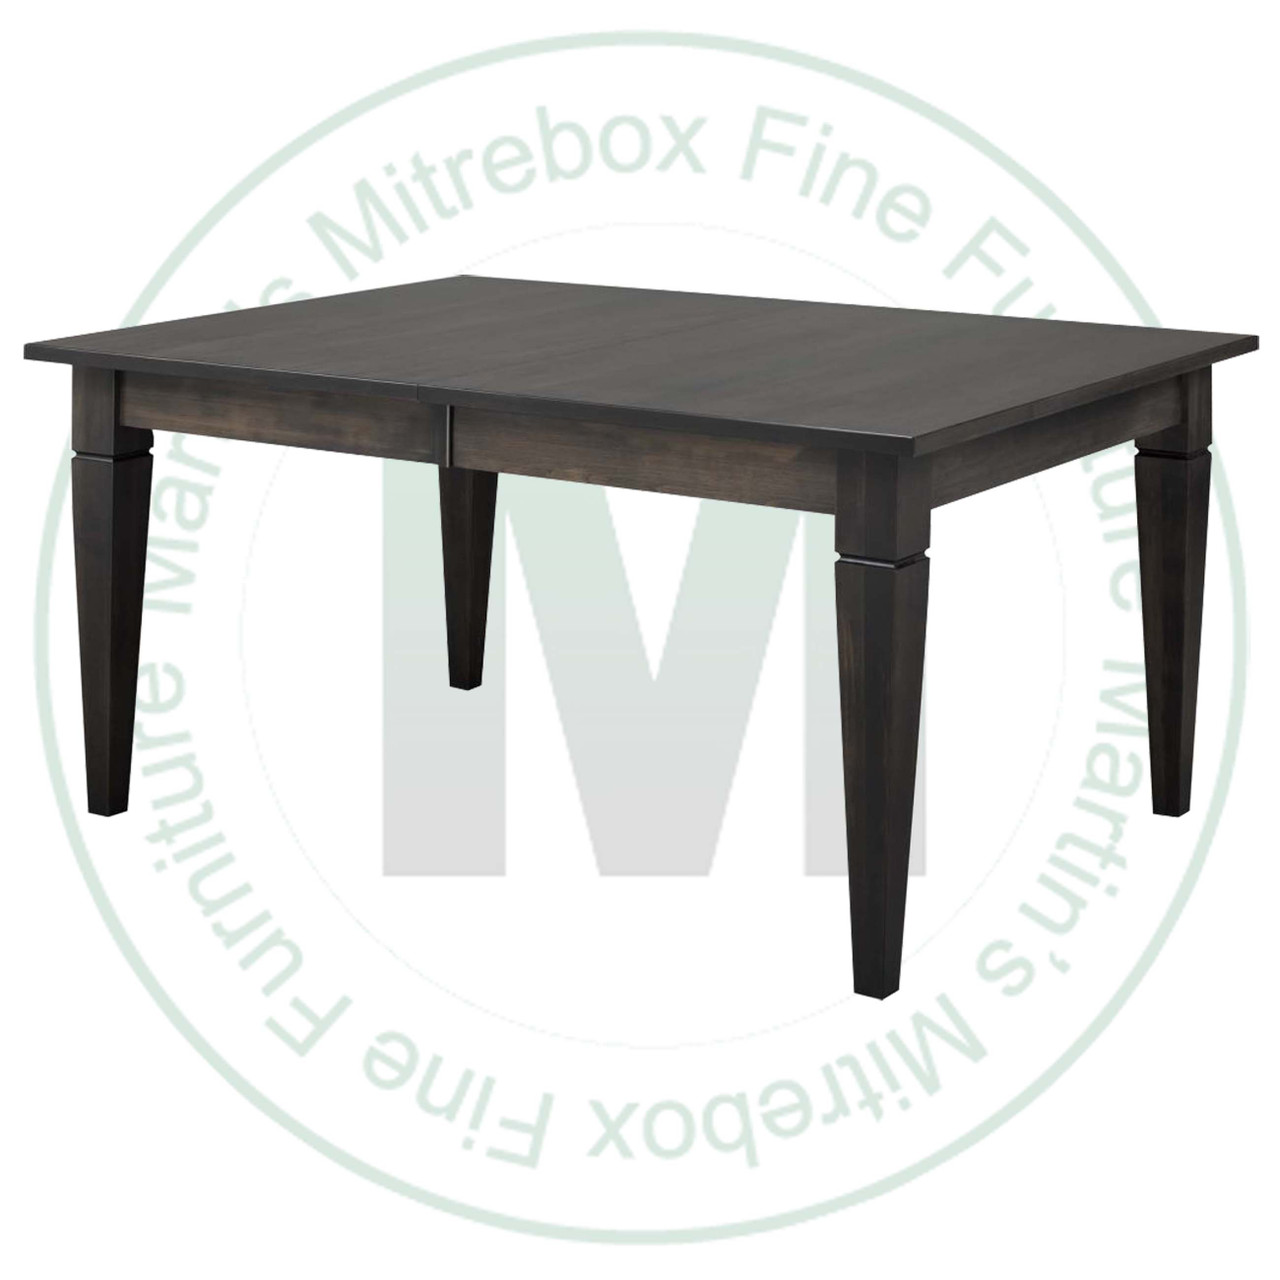 Wormy Maple Reesor Solid Top Harvest Table 48''D x 120''W x 30''H Table Has 1 3/4'' Thick Top And 2 - 16'' Extensions